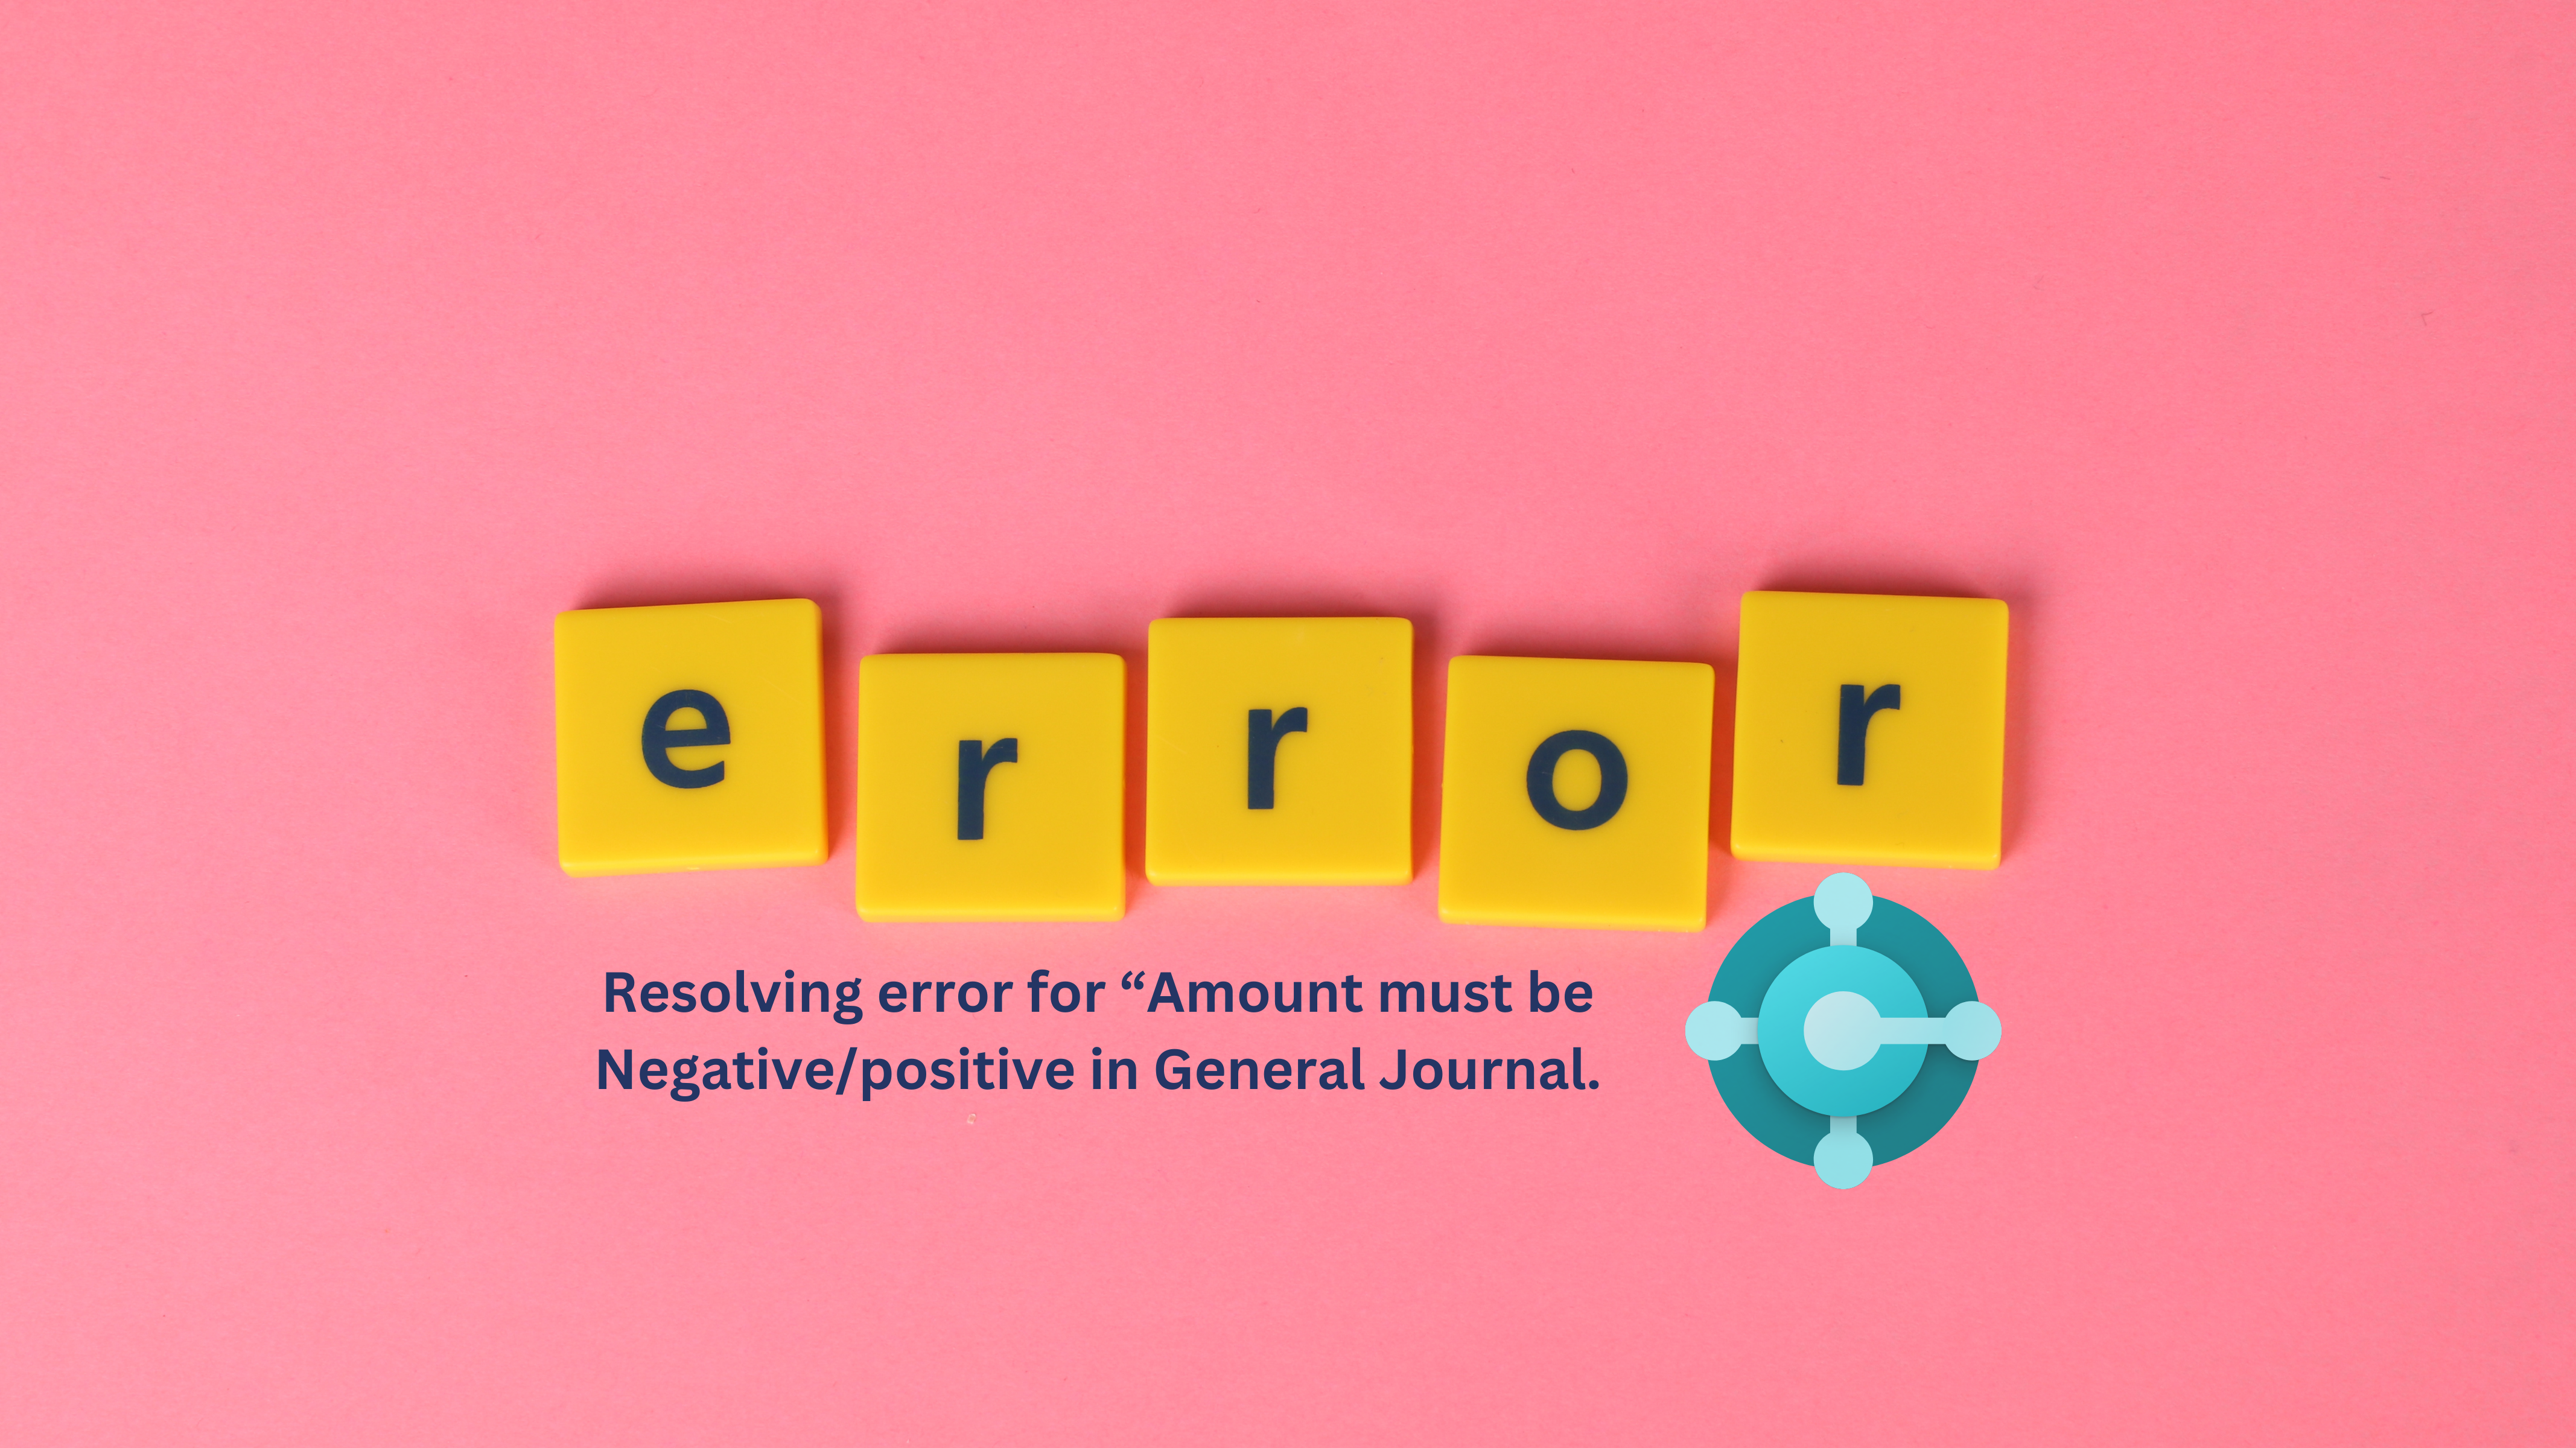 How to Resolve error for “Amount must be Negative/positive in General Journal line journal template name = ’General’ , journal batch name = ‘xxxx’ , line no. = ‘x0000’  “